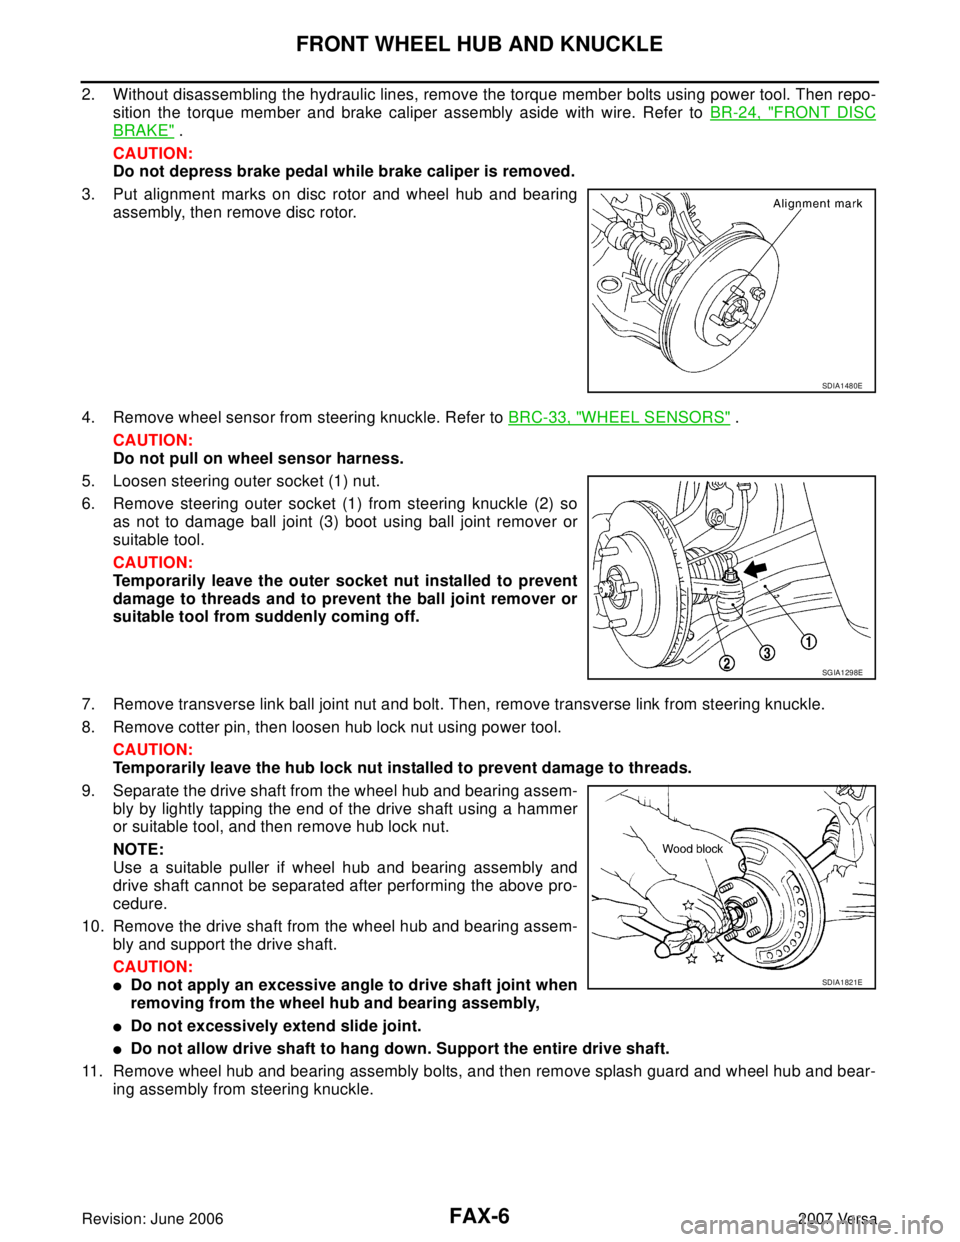 NISSAN LATIO 2007  Service Repair Manual FAX-6
FRONT WHEEL HUB AND KNUCKLE
Revision: June 20062007 Versa
2. Without disassembling the hydraulic lines, remove the torque member bolts using power tool. Then repo-
sition the torque member and b